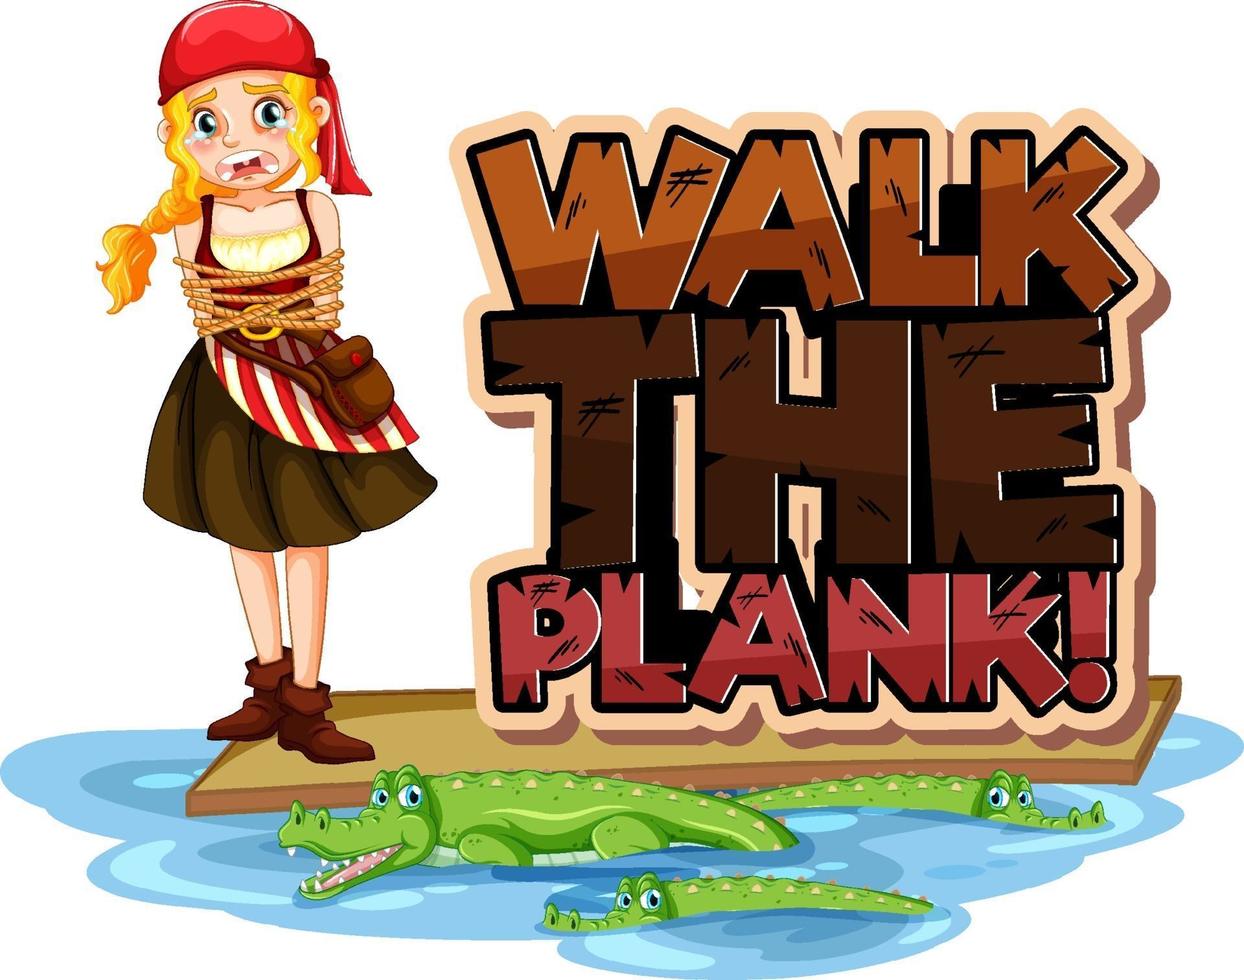 Walk The Plank font banner with a pirate boy cartoon character vector